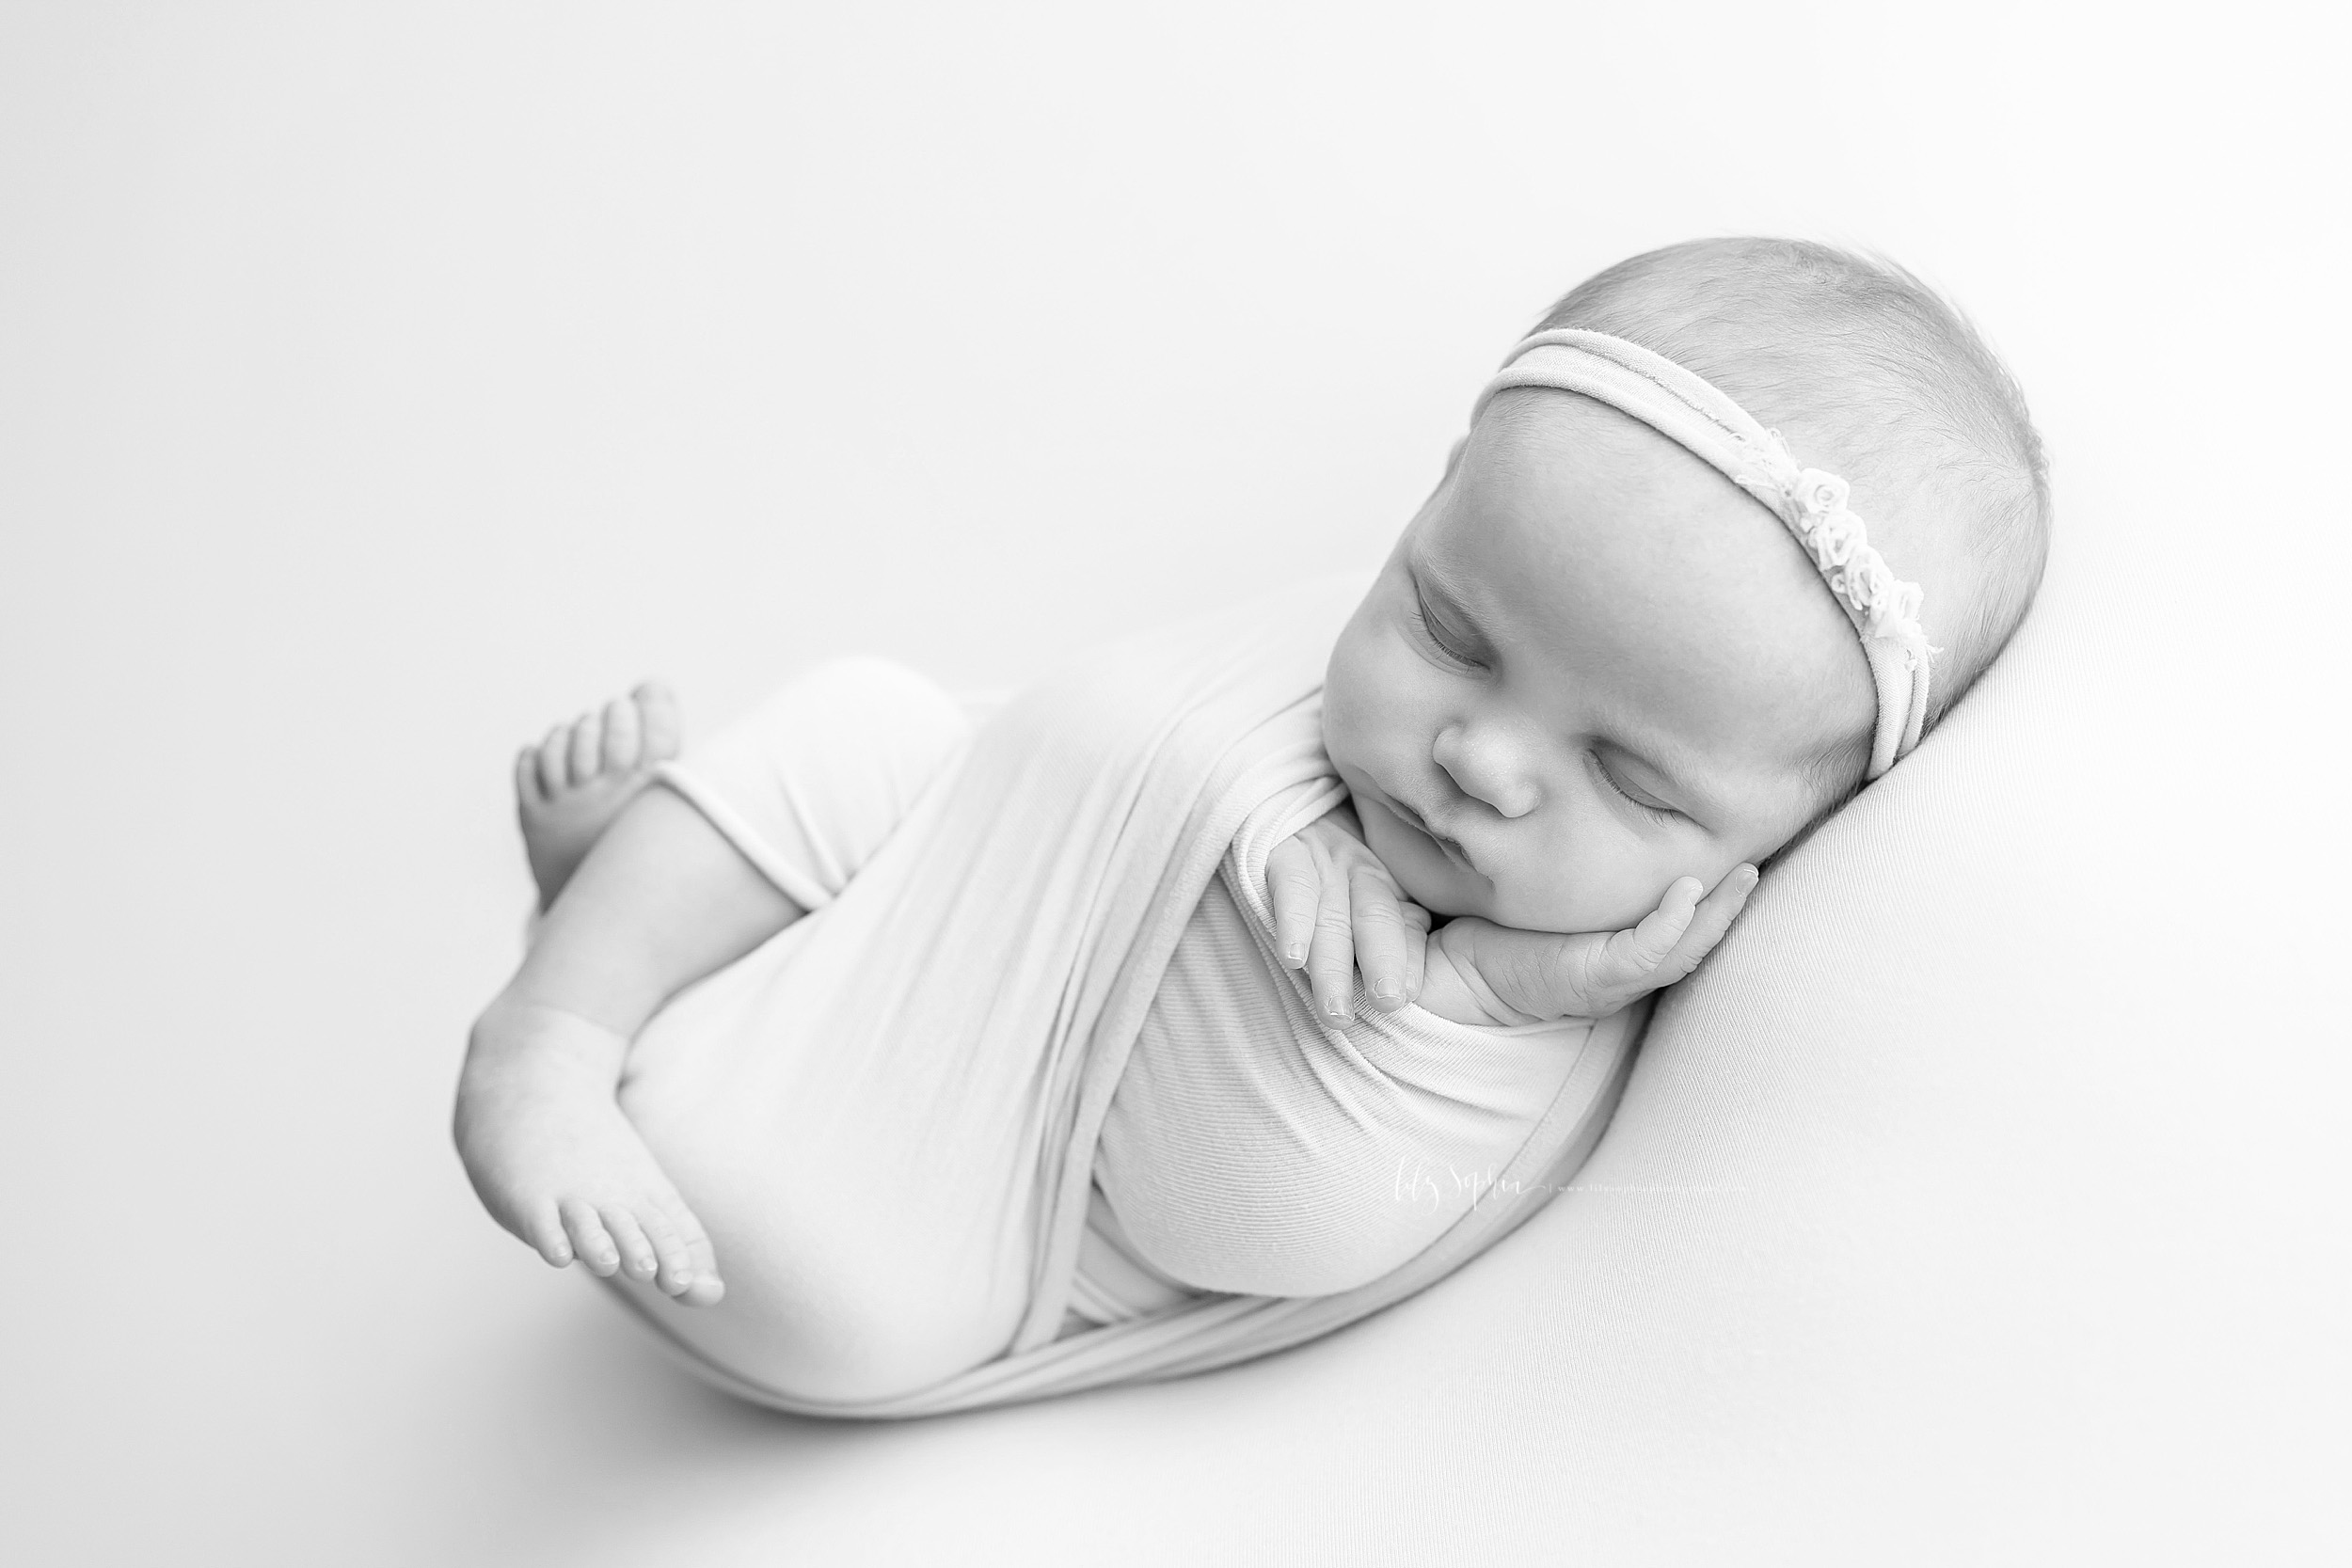  Black and white image of a sleeping infant girl wrapped in a knit  swaddle. Her legs are bent and her feet are sticking out the bottom of the swaddle while her little hands are sticking out the top. Her left hand is open and resting on her cheek. Sh